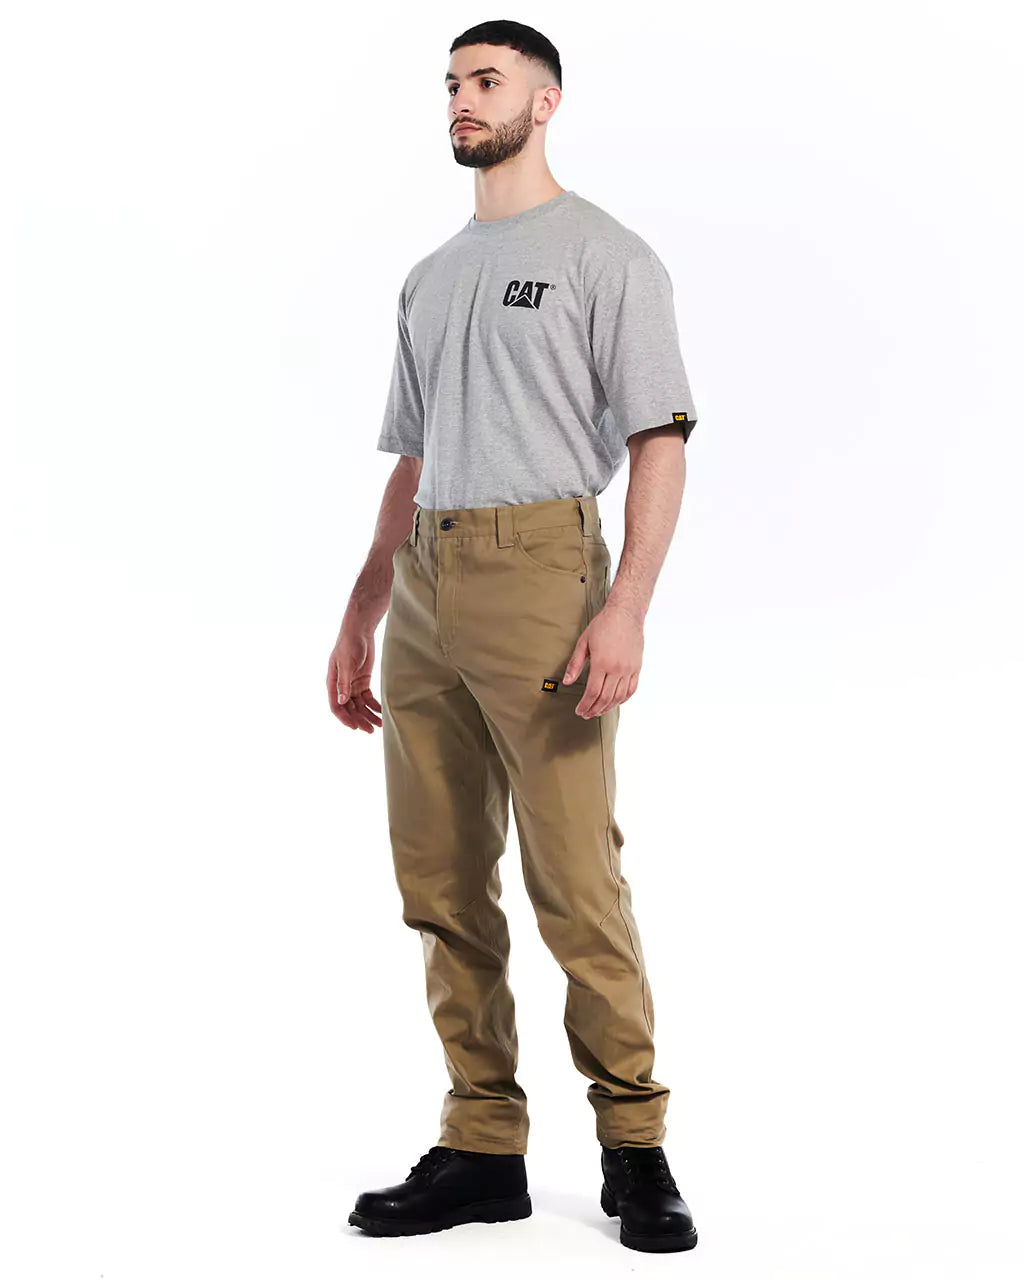 Easy Care Unisex Cotton Stretch Ripstop Segmented Work Pants